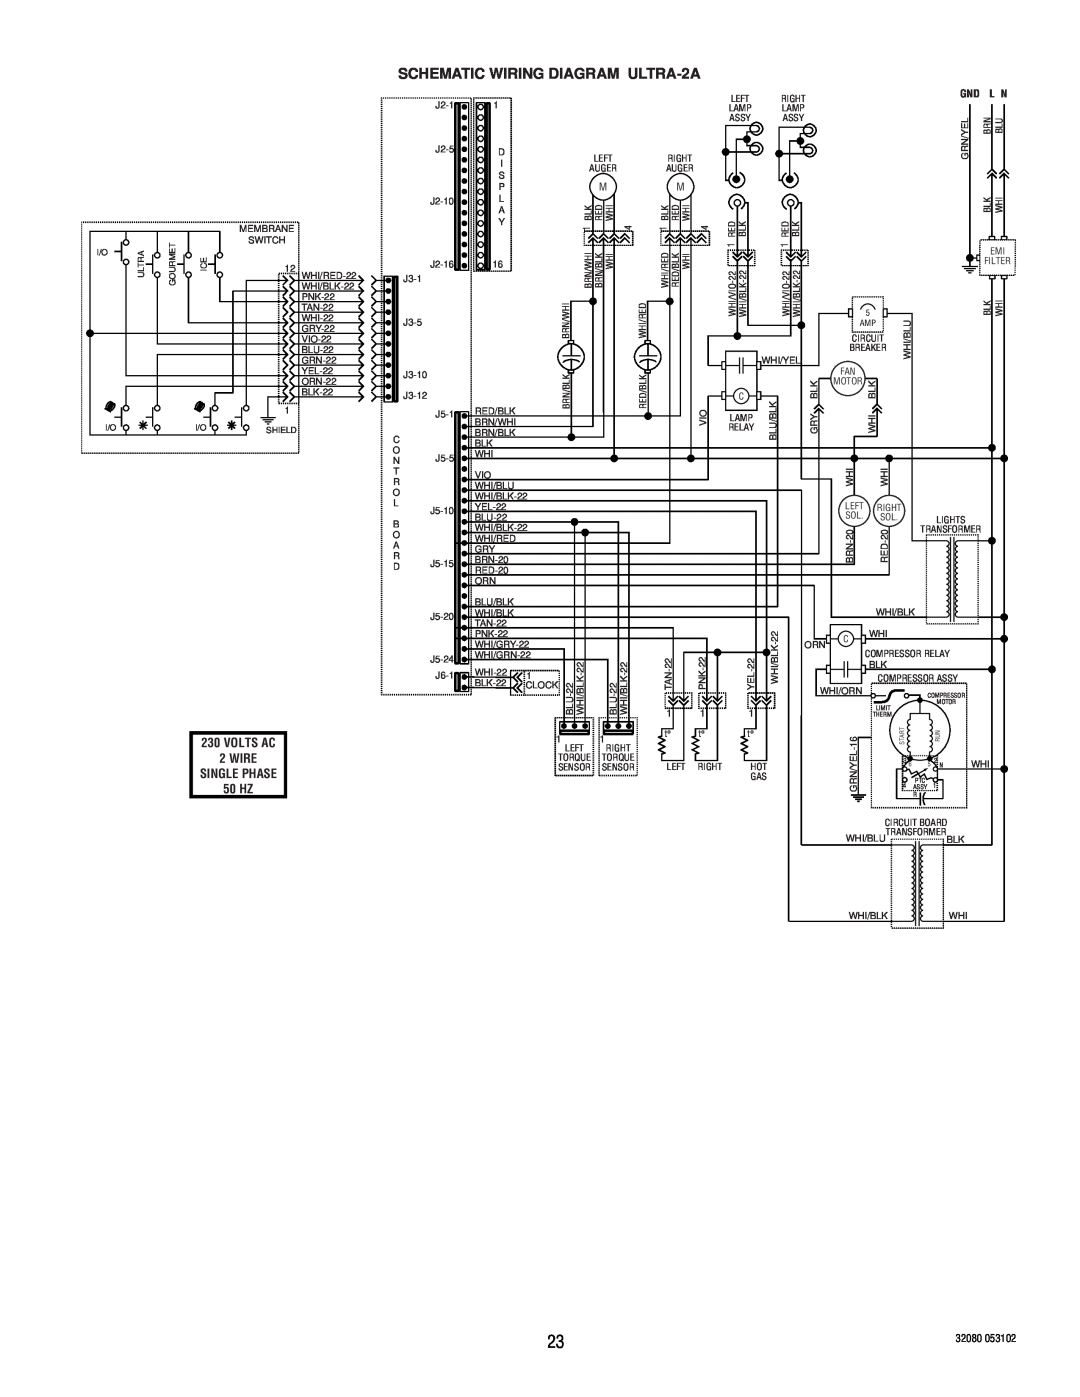 Bunn manual SCHEMATIC WIRING DIAGRAM ULTRA-2A, Volts Ac, Wire, Single Phase, 50 HZ, 32080 